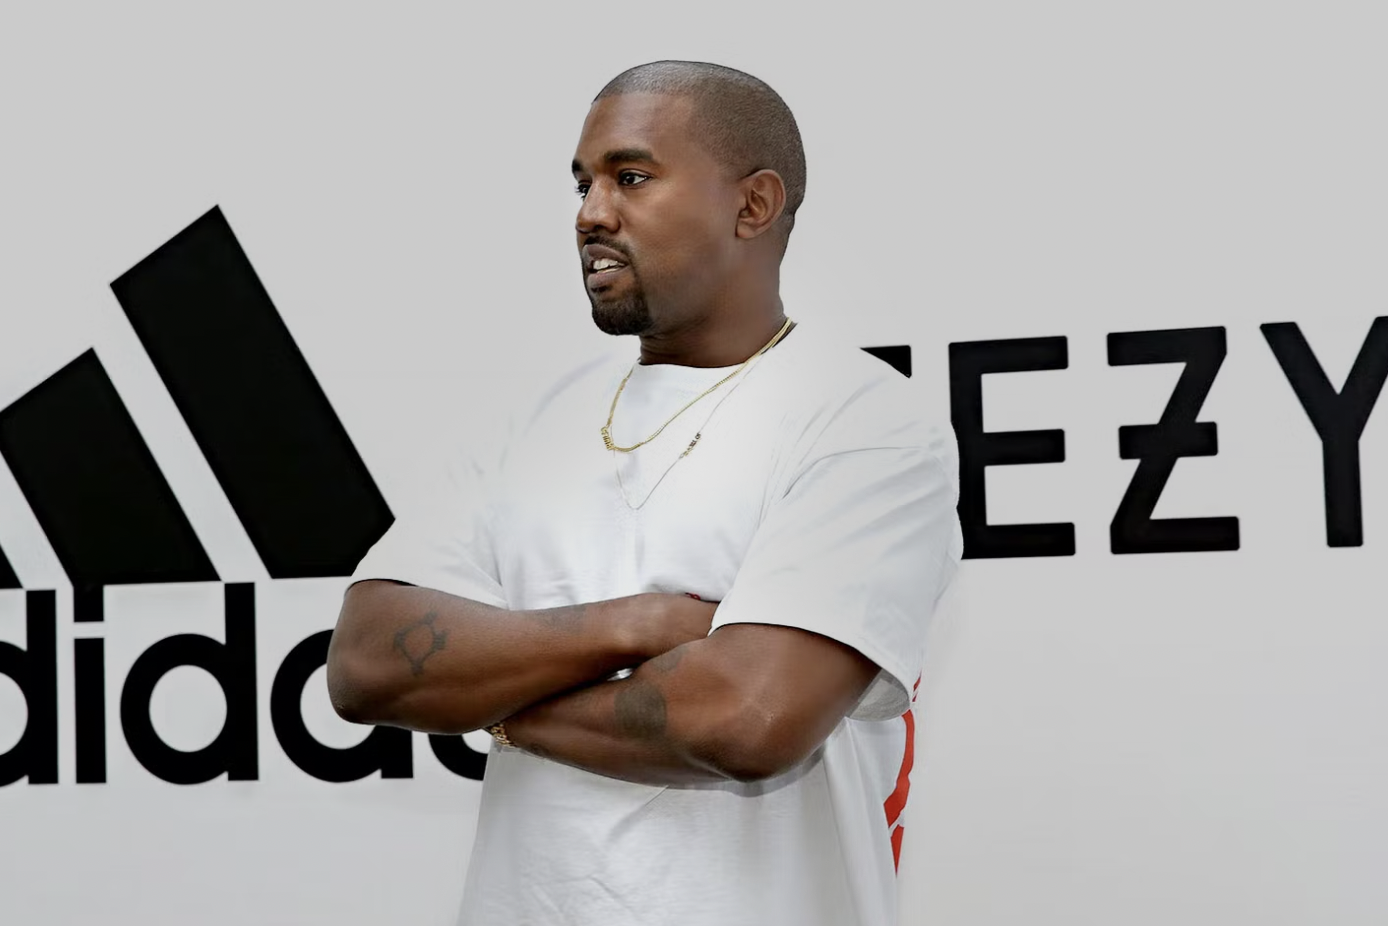 Kanye West stands with arms folded in front of a white wall bearing the adidas and YEEZY logos.